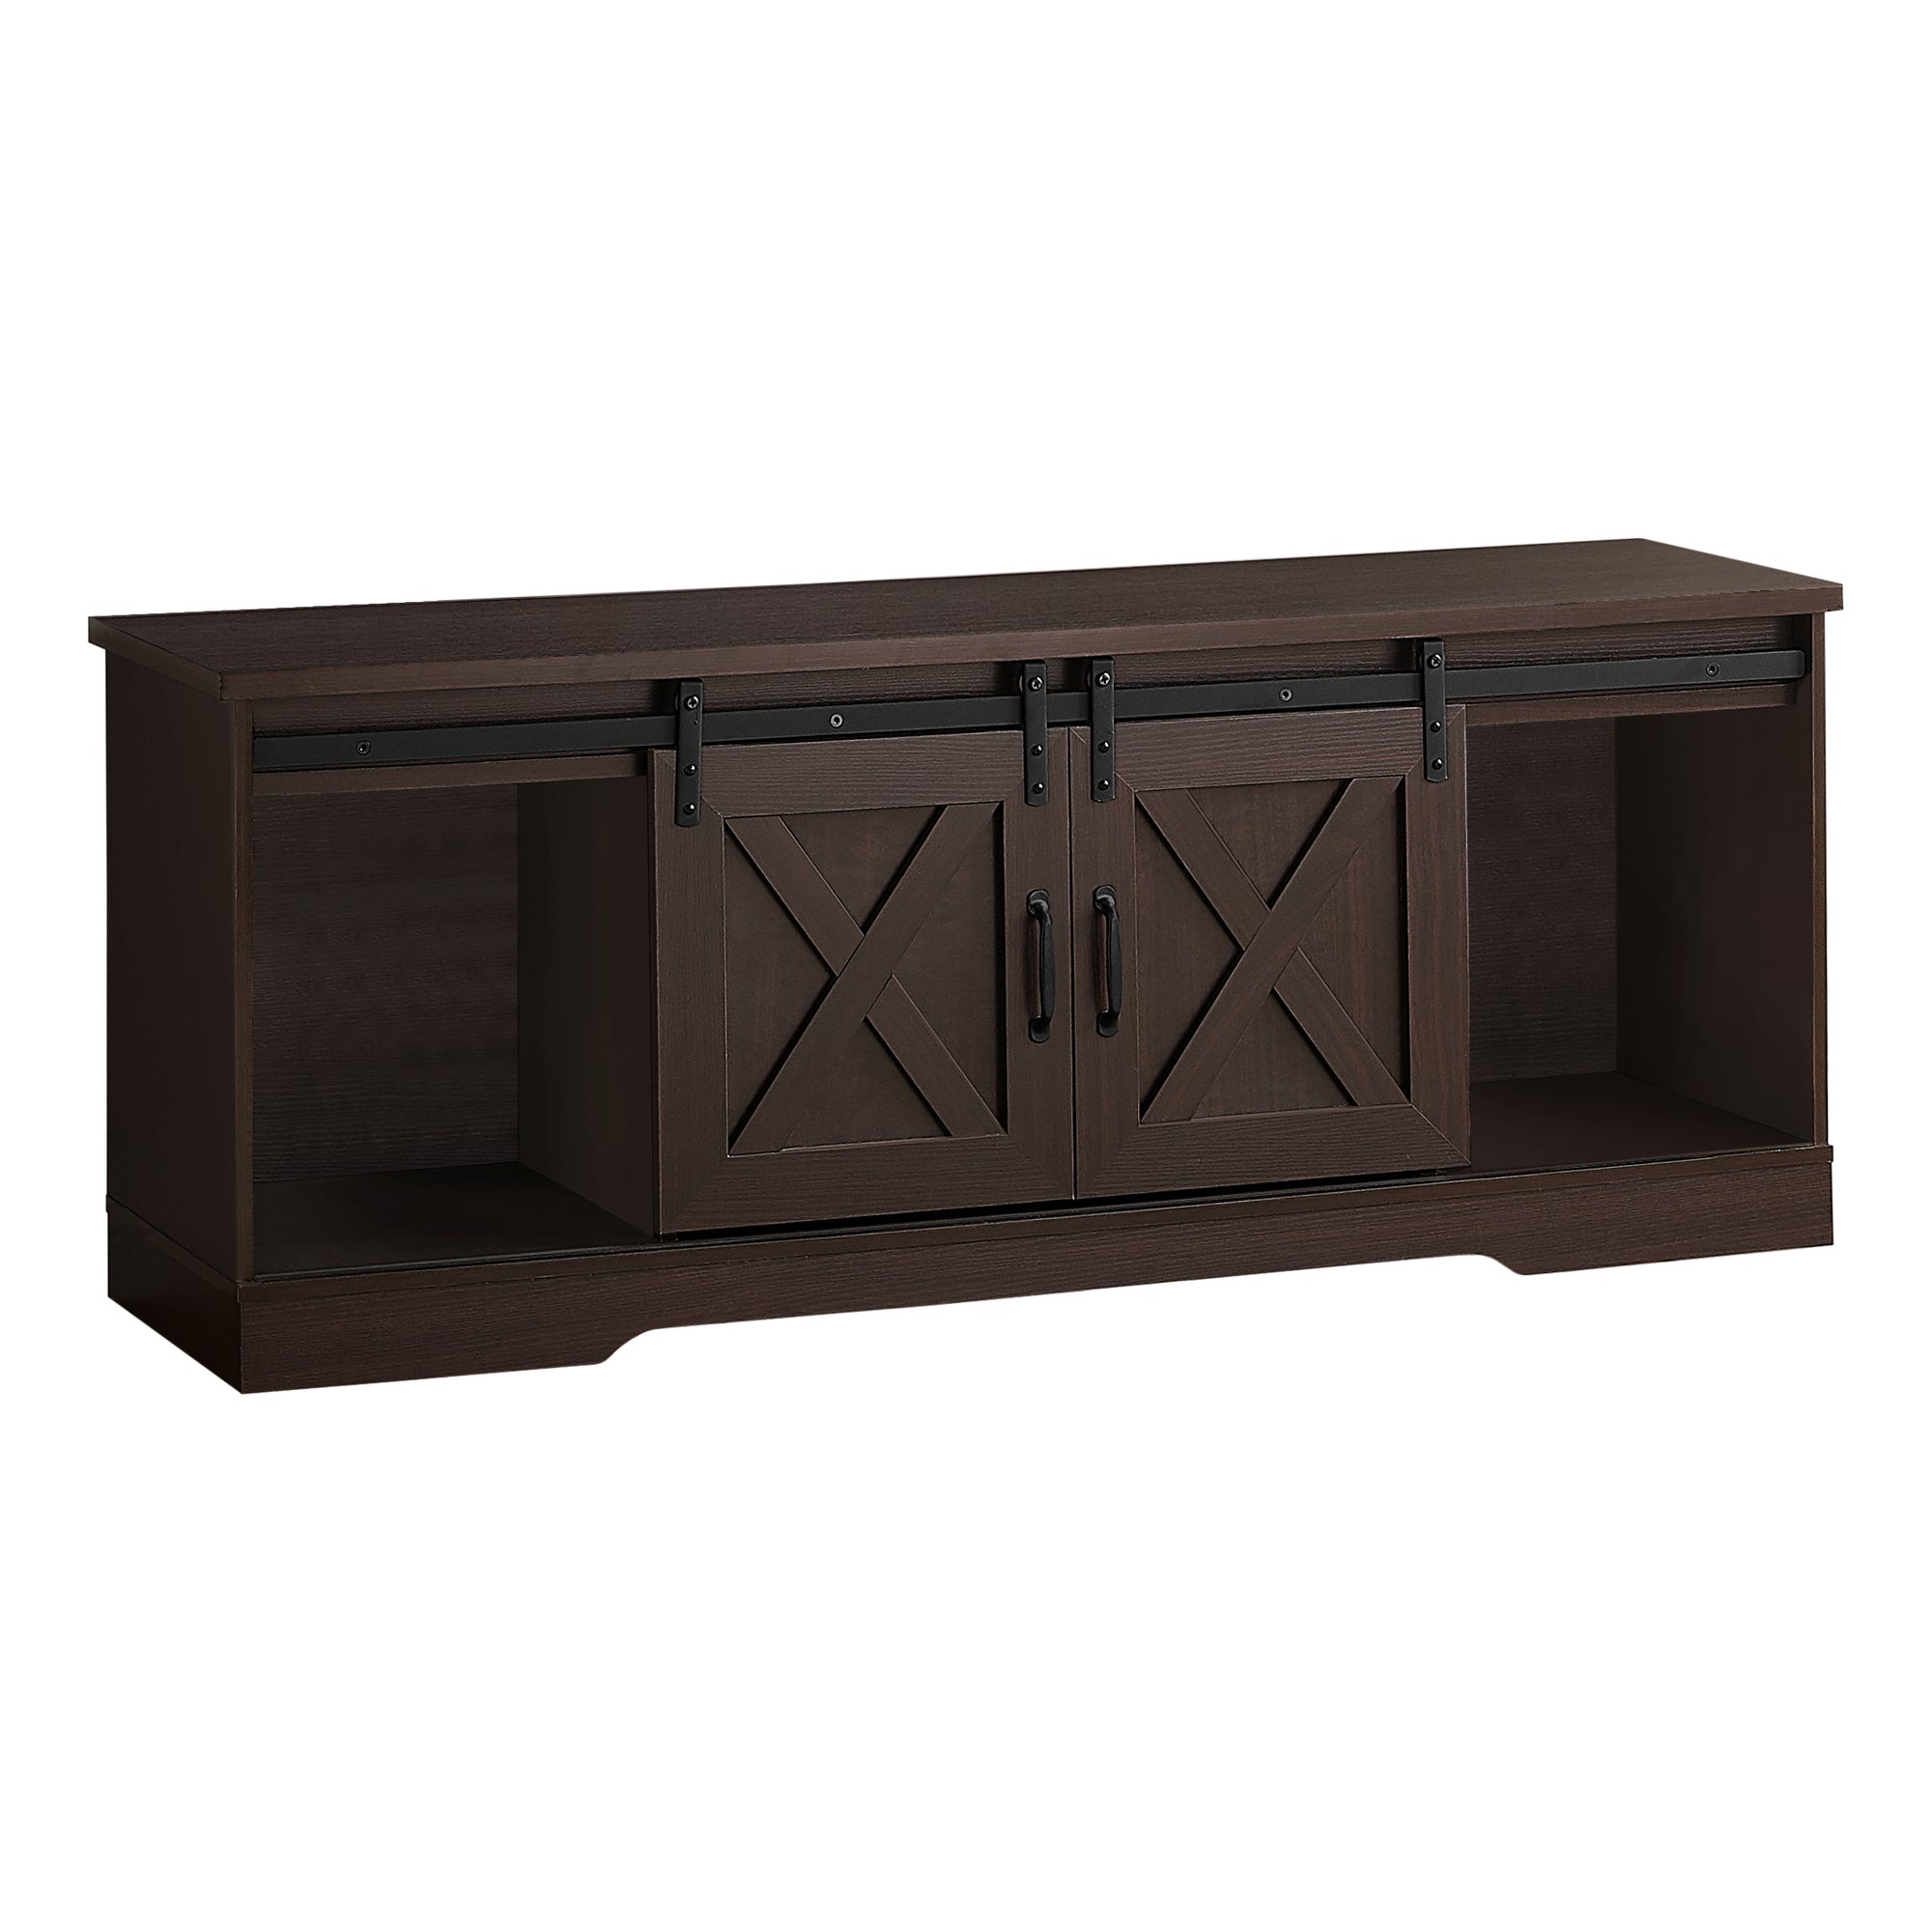 Tv Stand - 60L / Espresso With 2 Sliding Doors